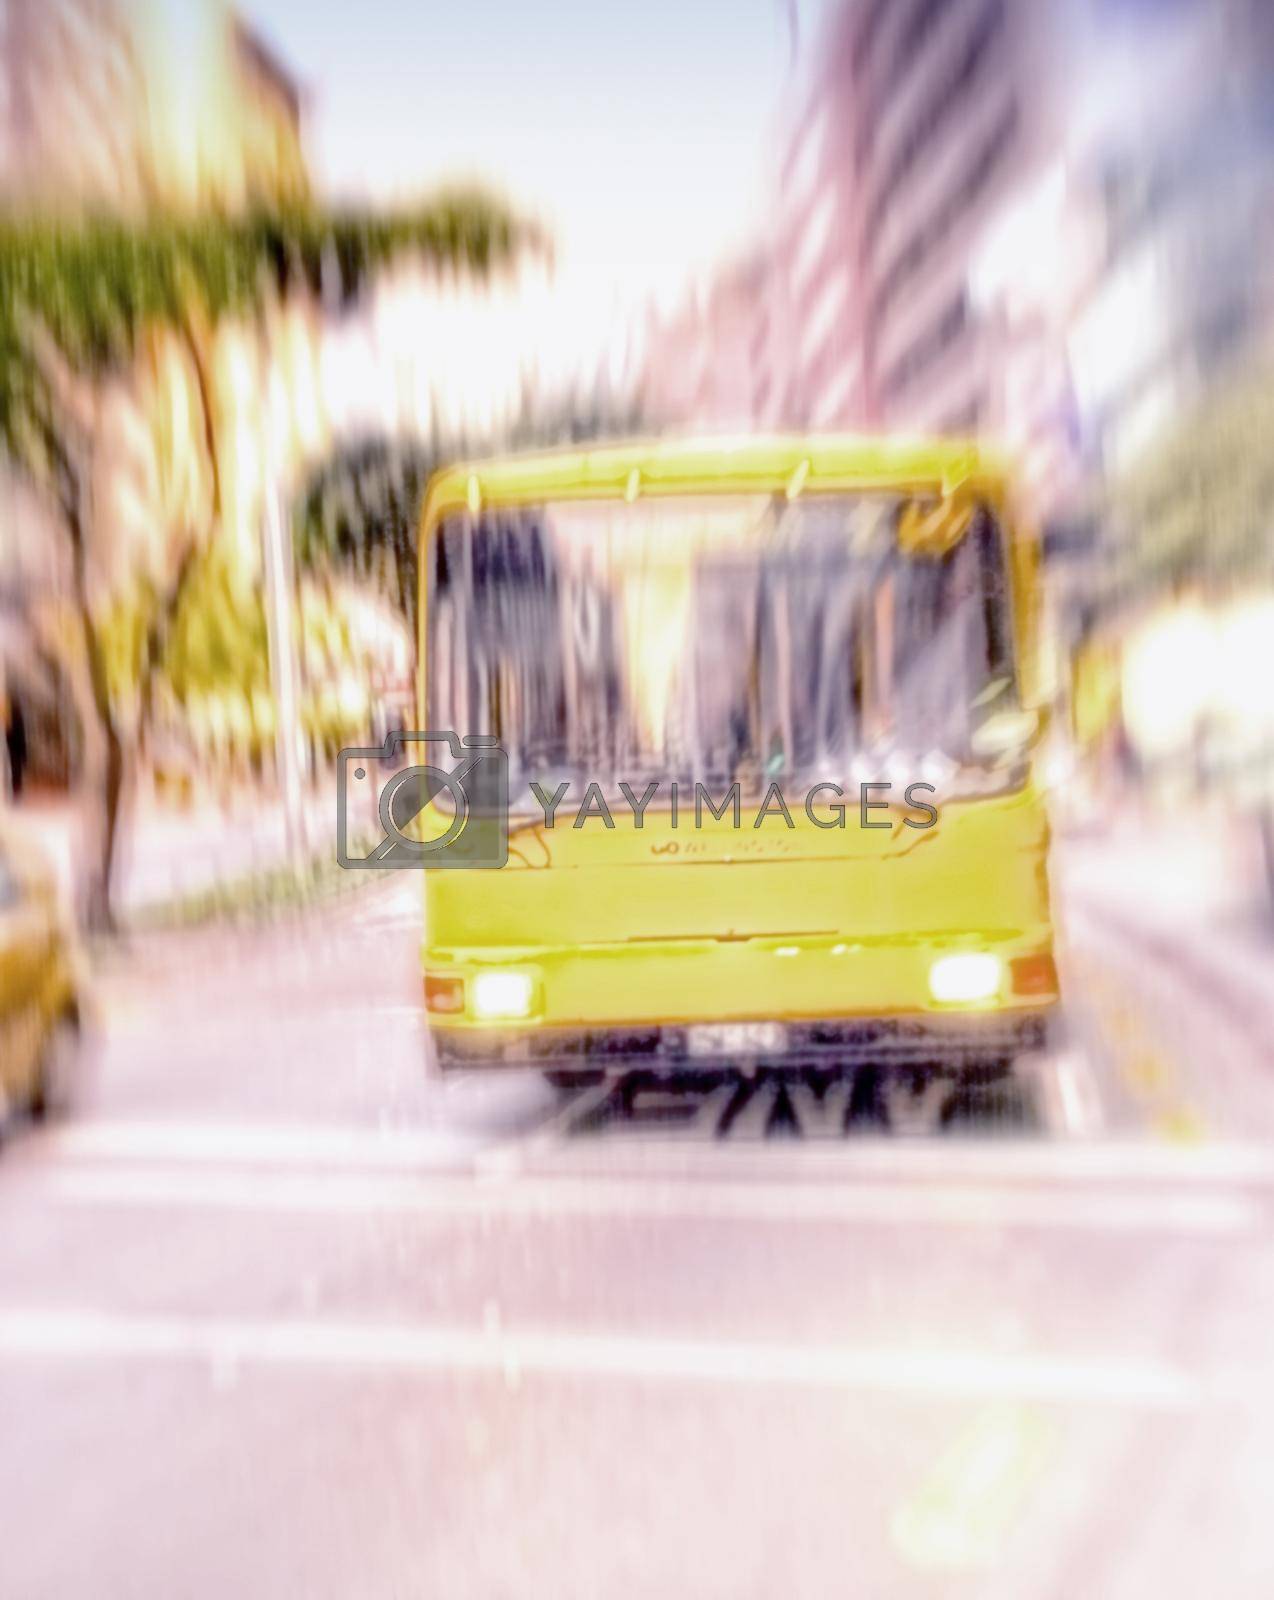 A yellow bus driving and traveling through a bust scene in the city. Commuting through a busy urban town, using public transport to travel the roads and streets to get to a destination.